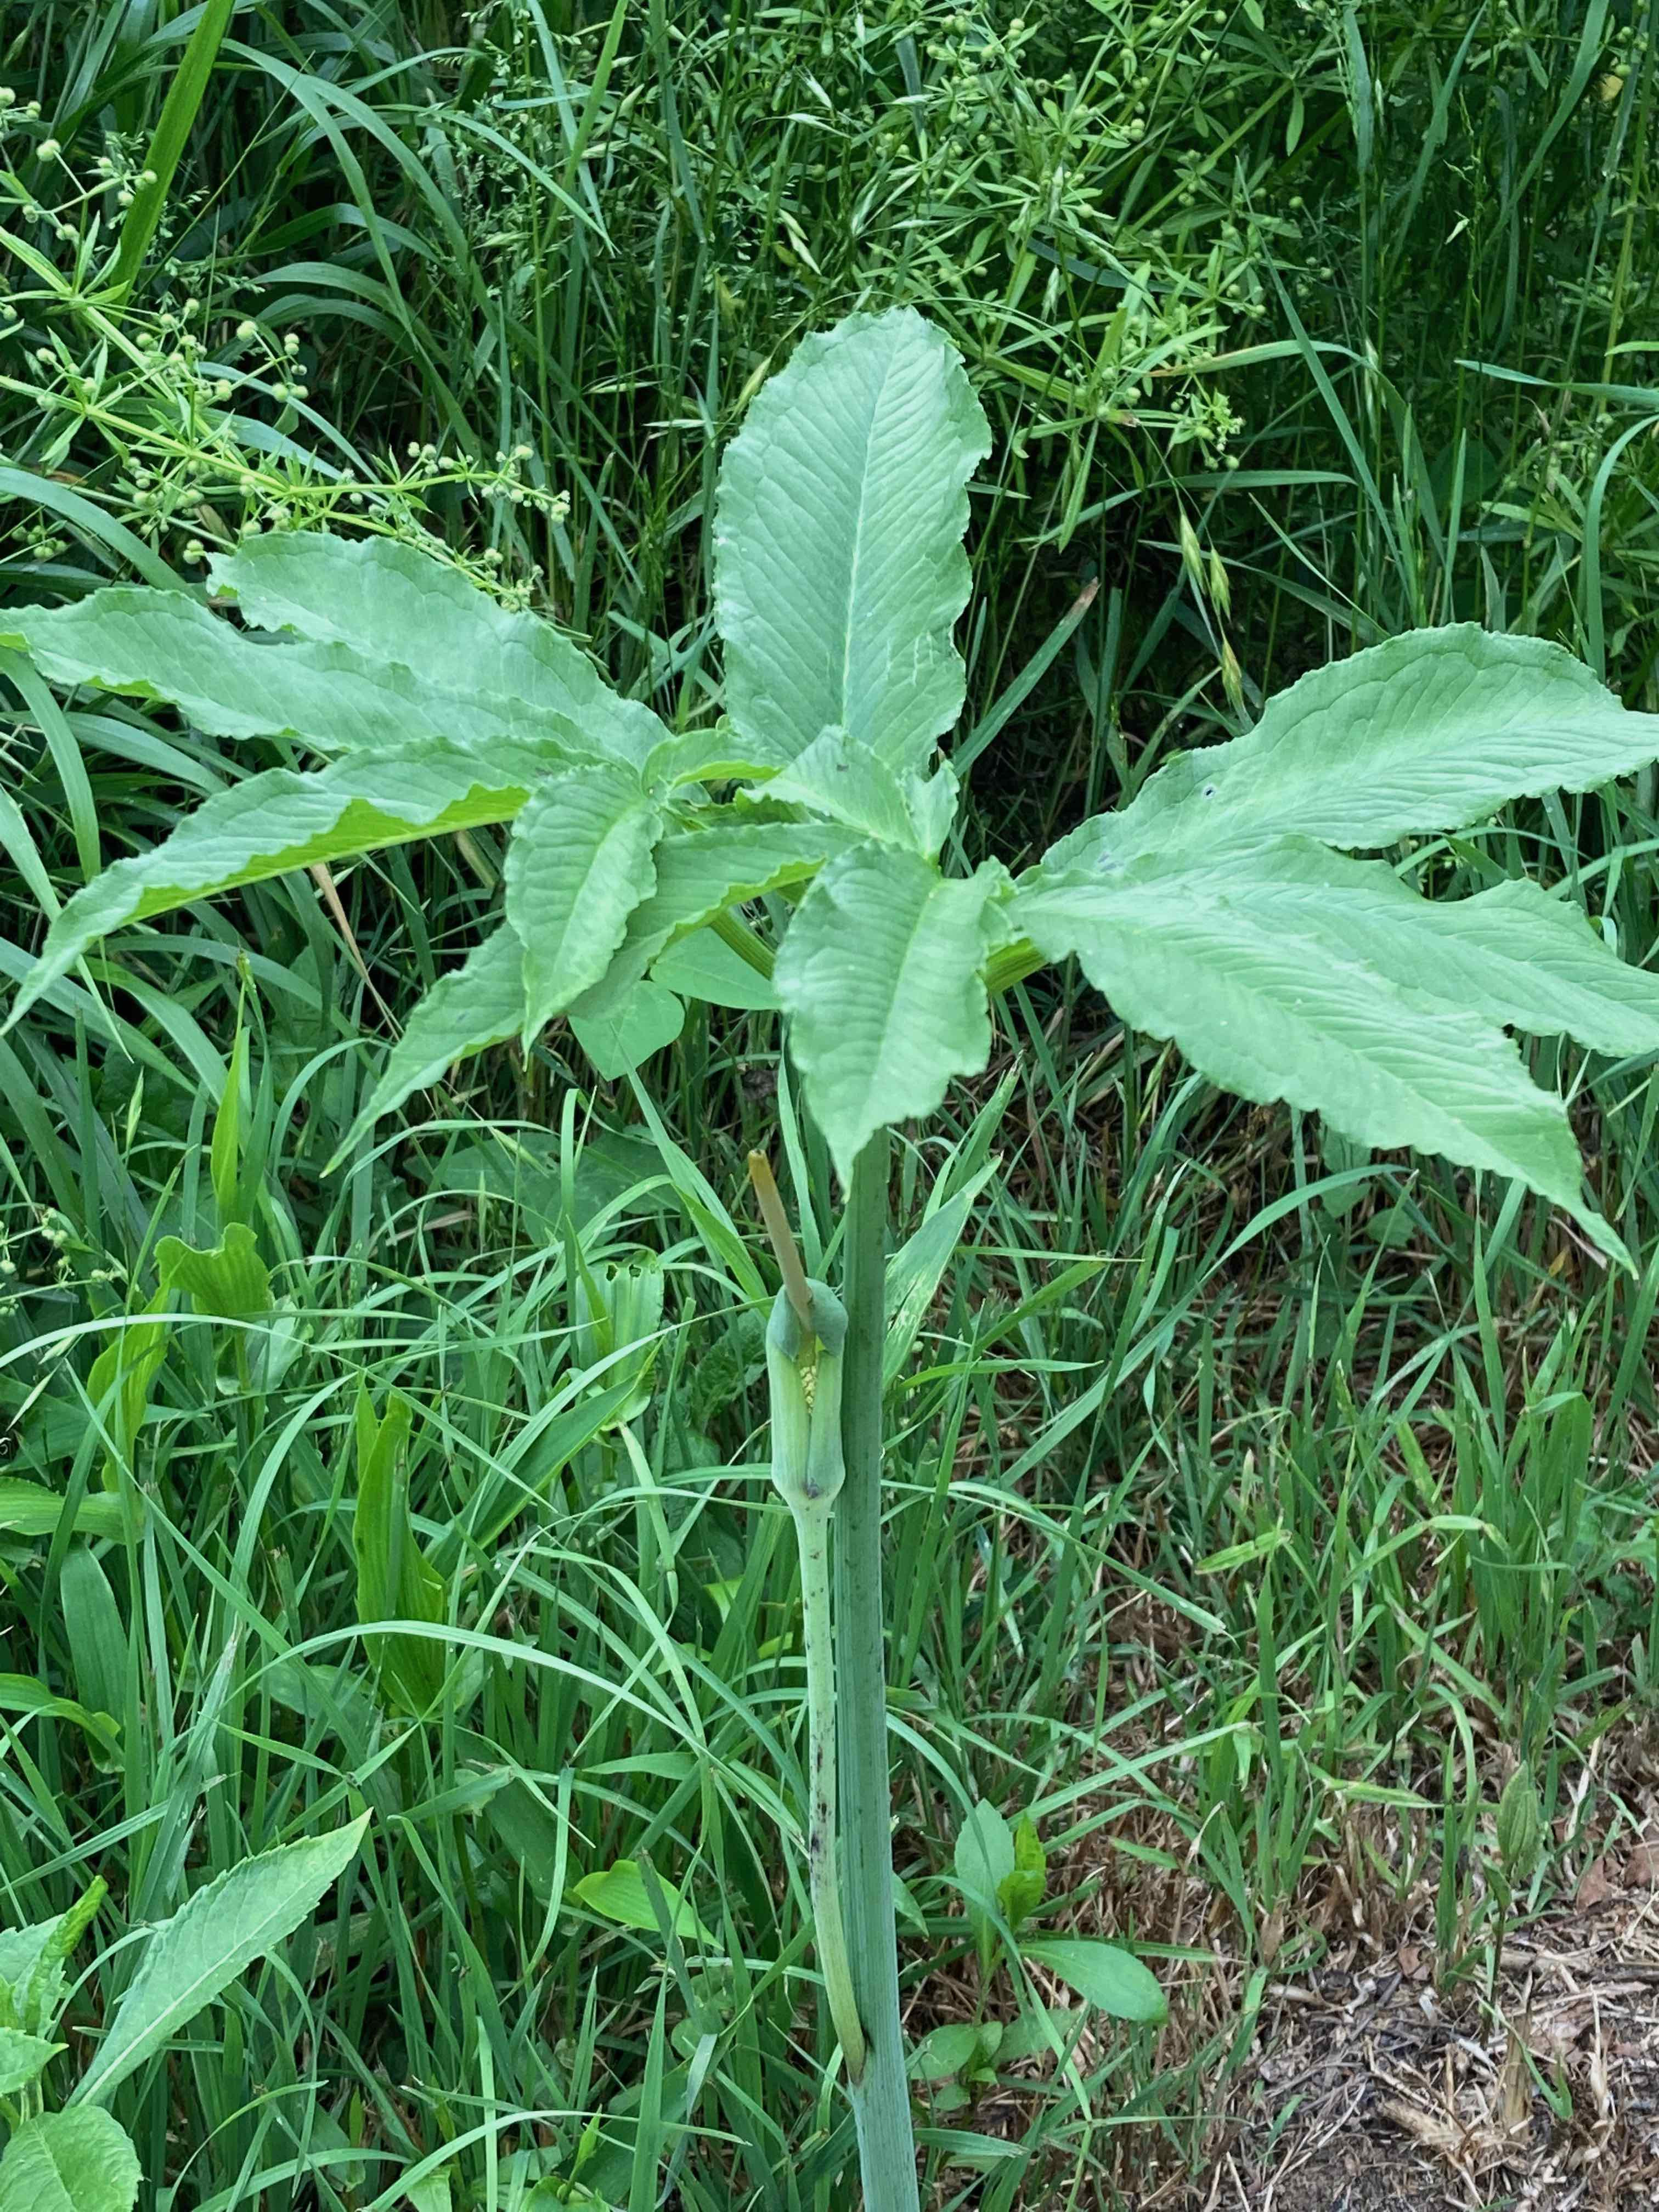 The Scientific Name is Arisaema dracontium [= Muricauda dracontium]. You will likely hear them called Green Dragon. This picture shows the On the edge of a wet depression along the Little Tennessee River Greenway. of Arisaema dracontium [= Muricauda dracontium]